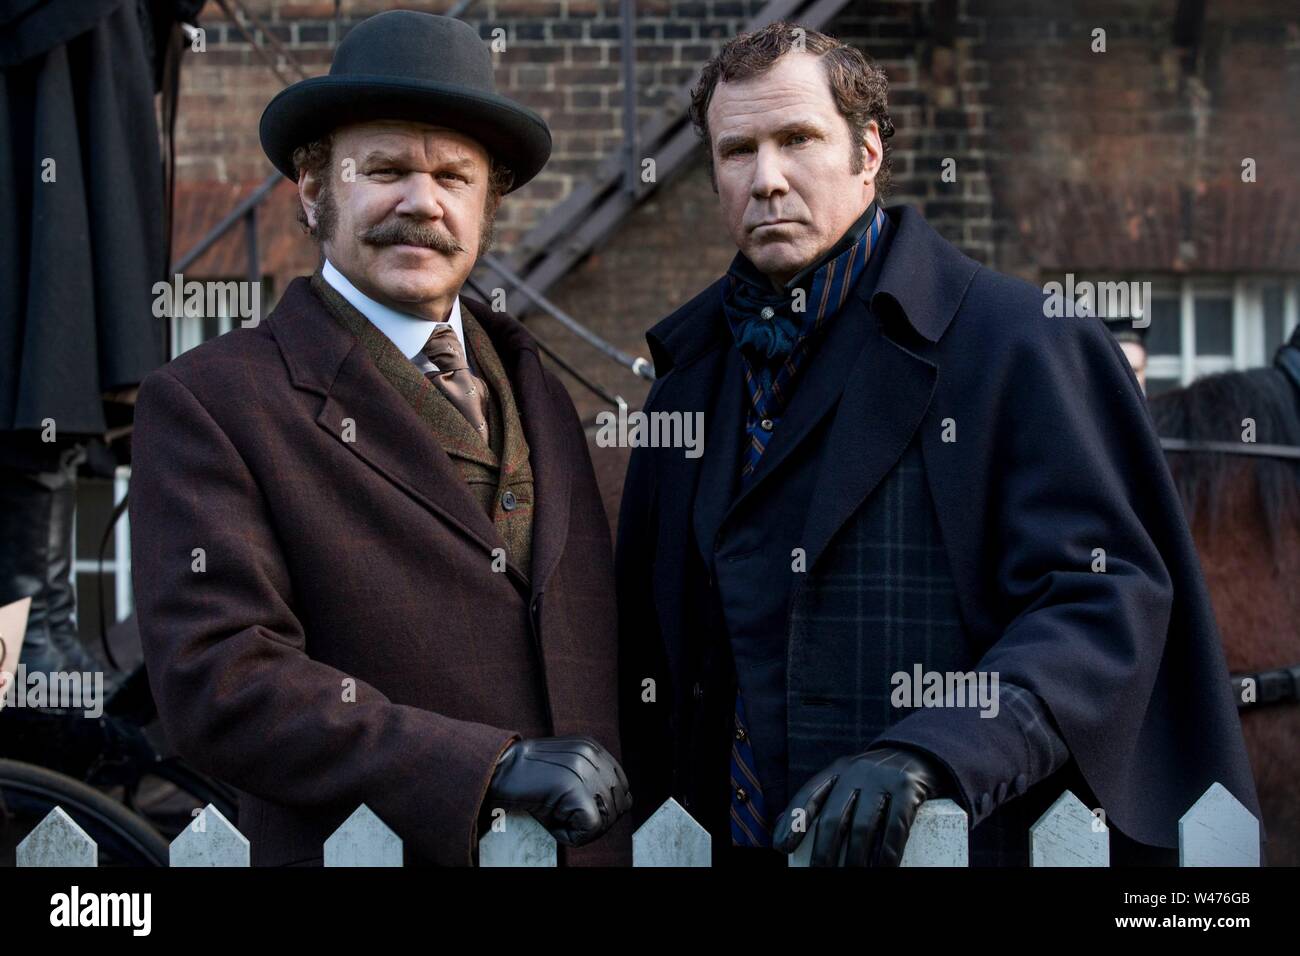 JOHN C. REILLY and WILL FERRELL in HOLMES & WATSON (2018), directed by ETAN COHEN. Credit: Columbia Pictures / Gary Sanchez Productions / Mosaic / Album Stock Photo